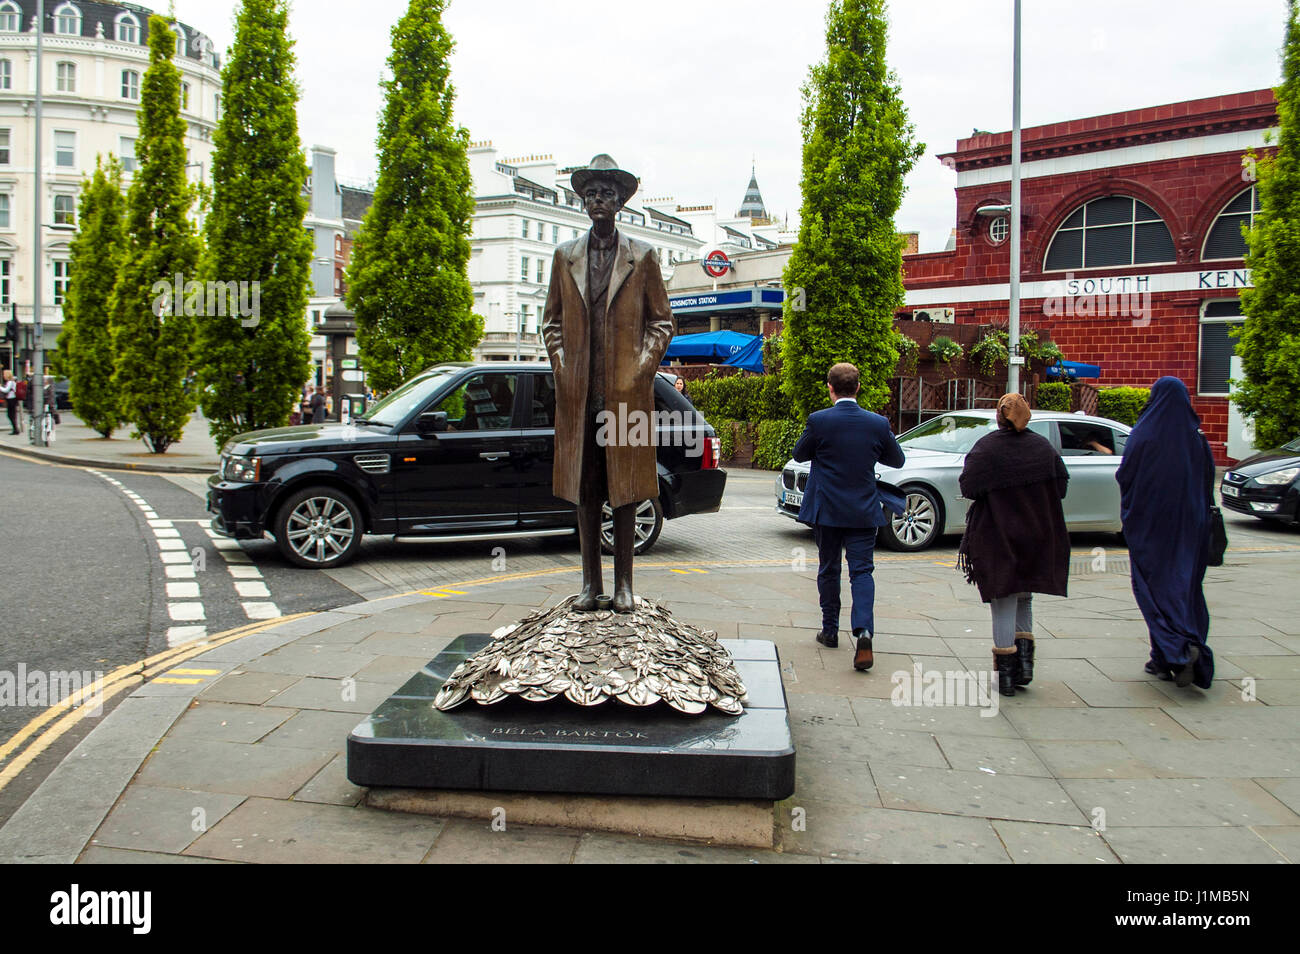 London, UK, 21/04/2017 Bela Bartok, 20th century Hungarian composer and pianist, statue in South Kensington. Stock Photo